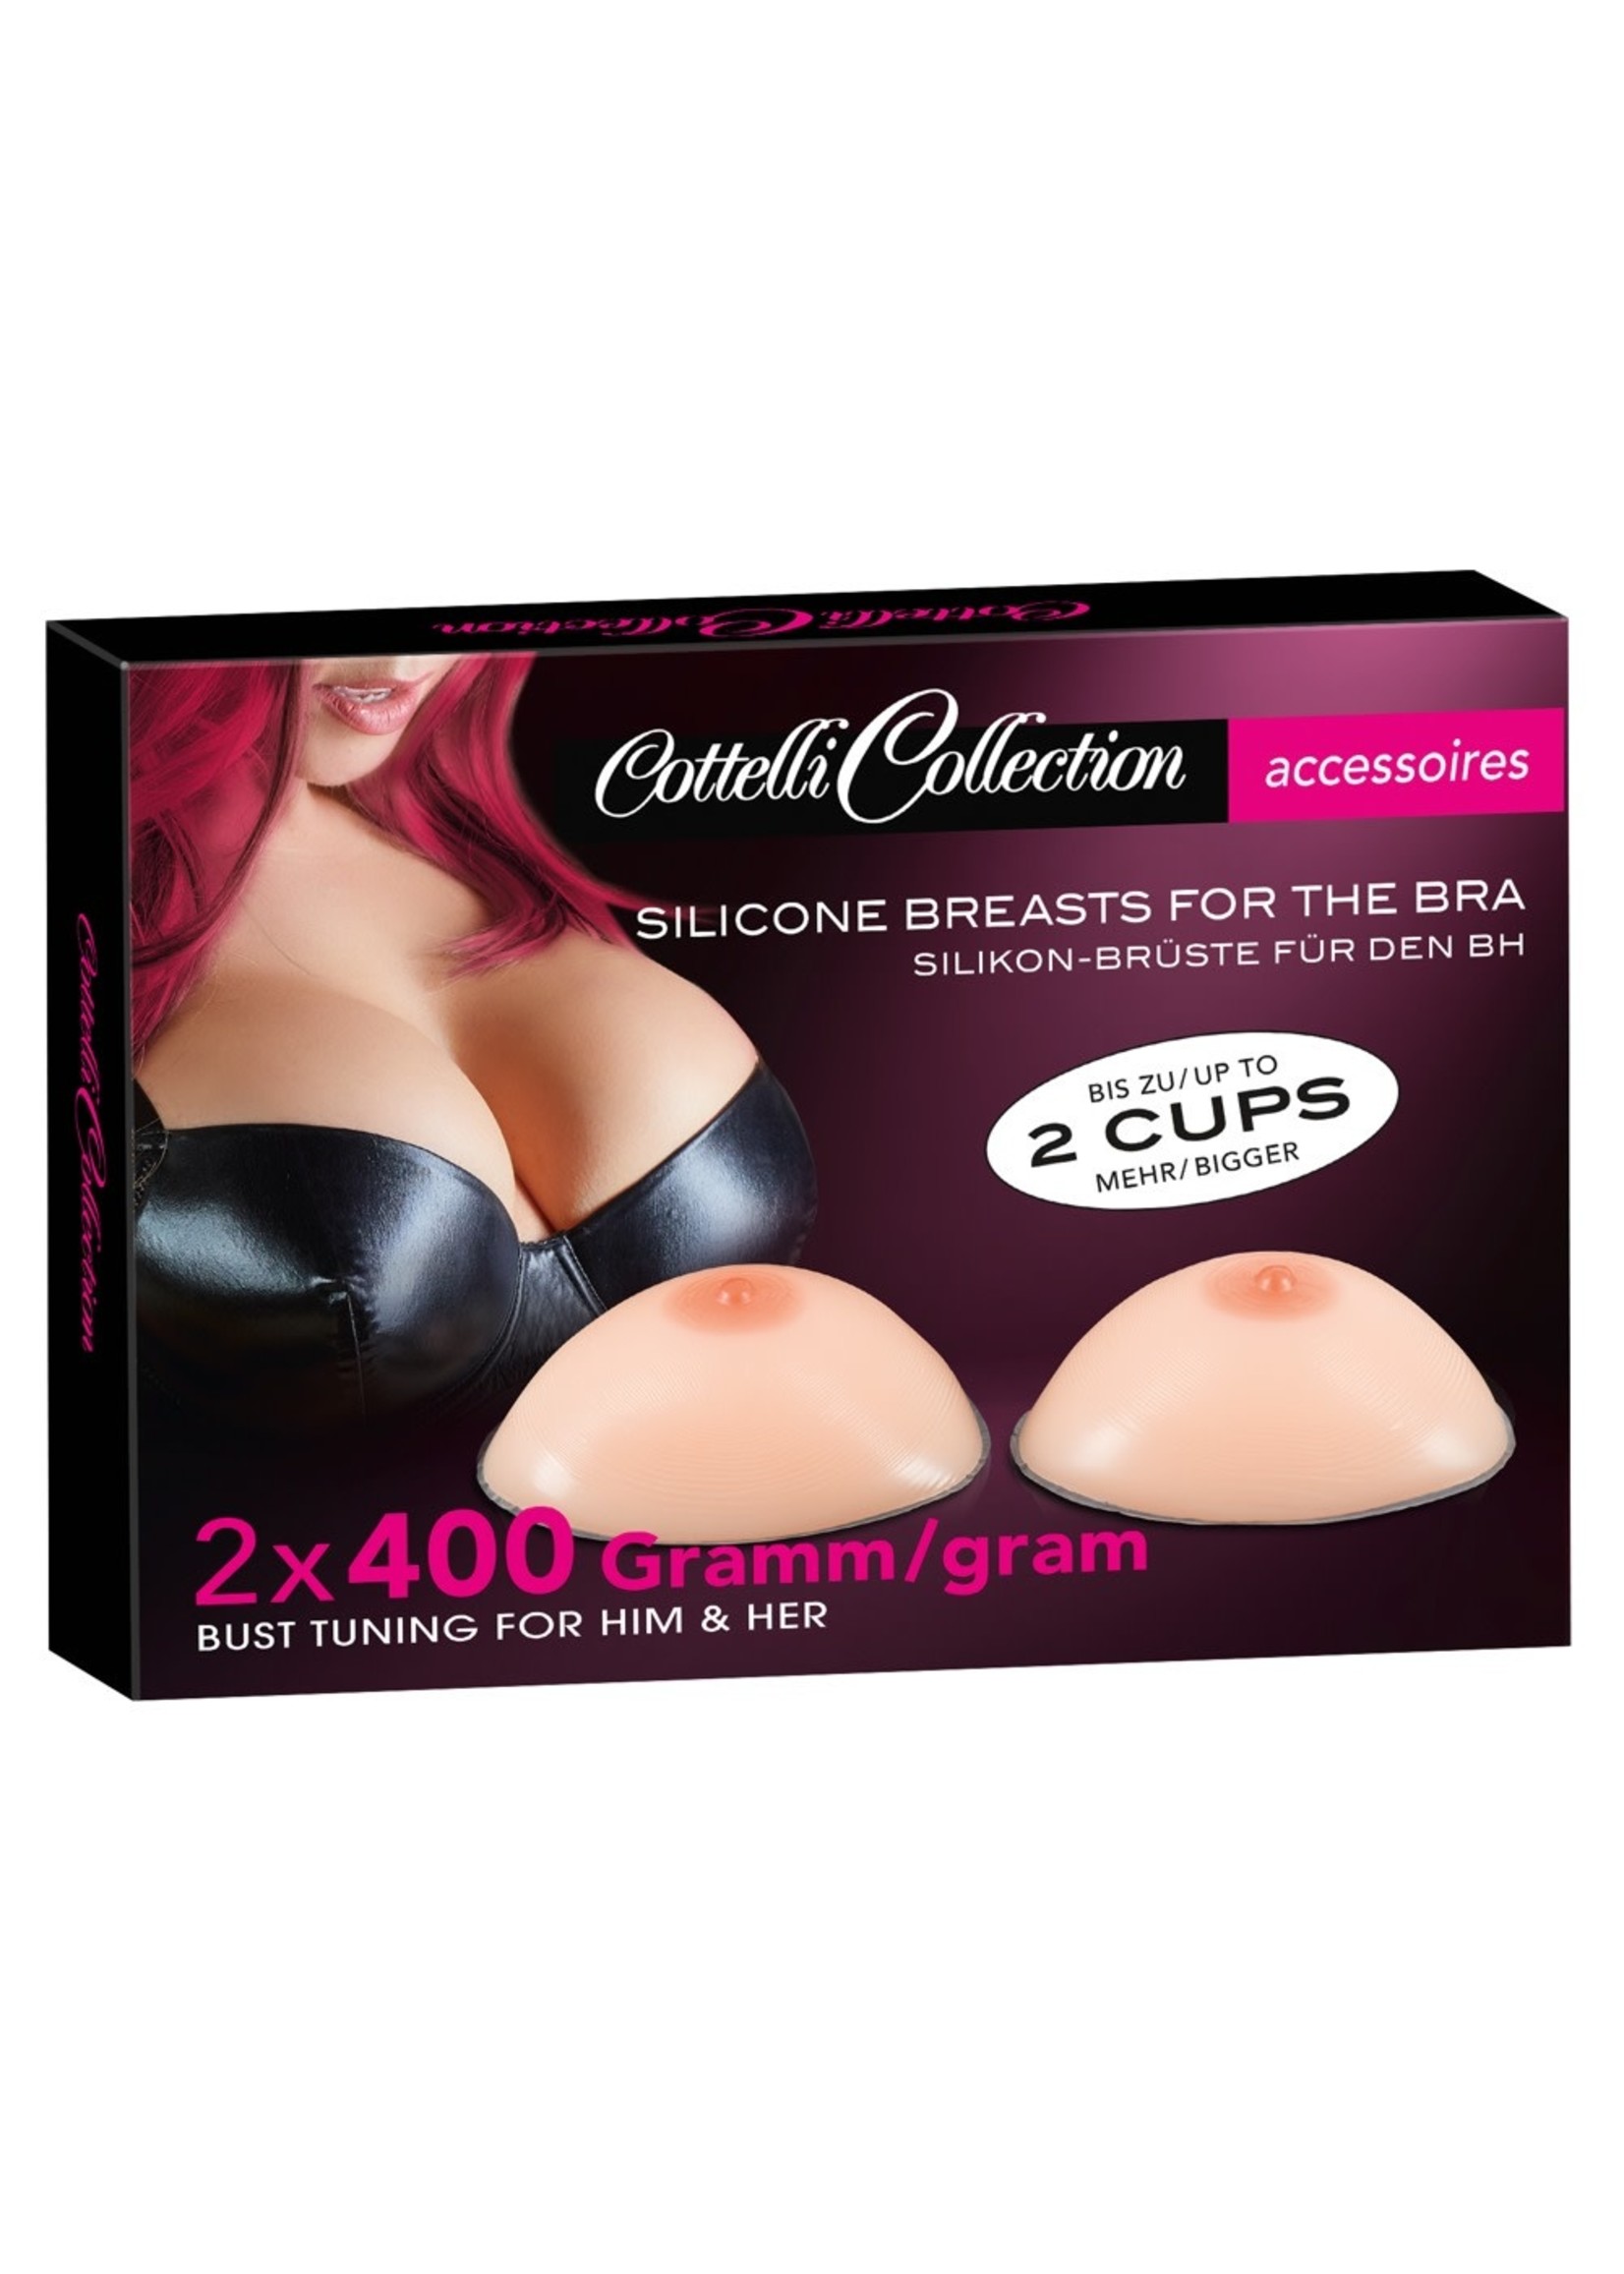 Cotteli Collection Siliconen breasts 400 gr